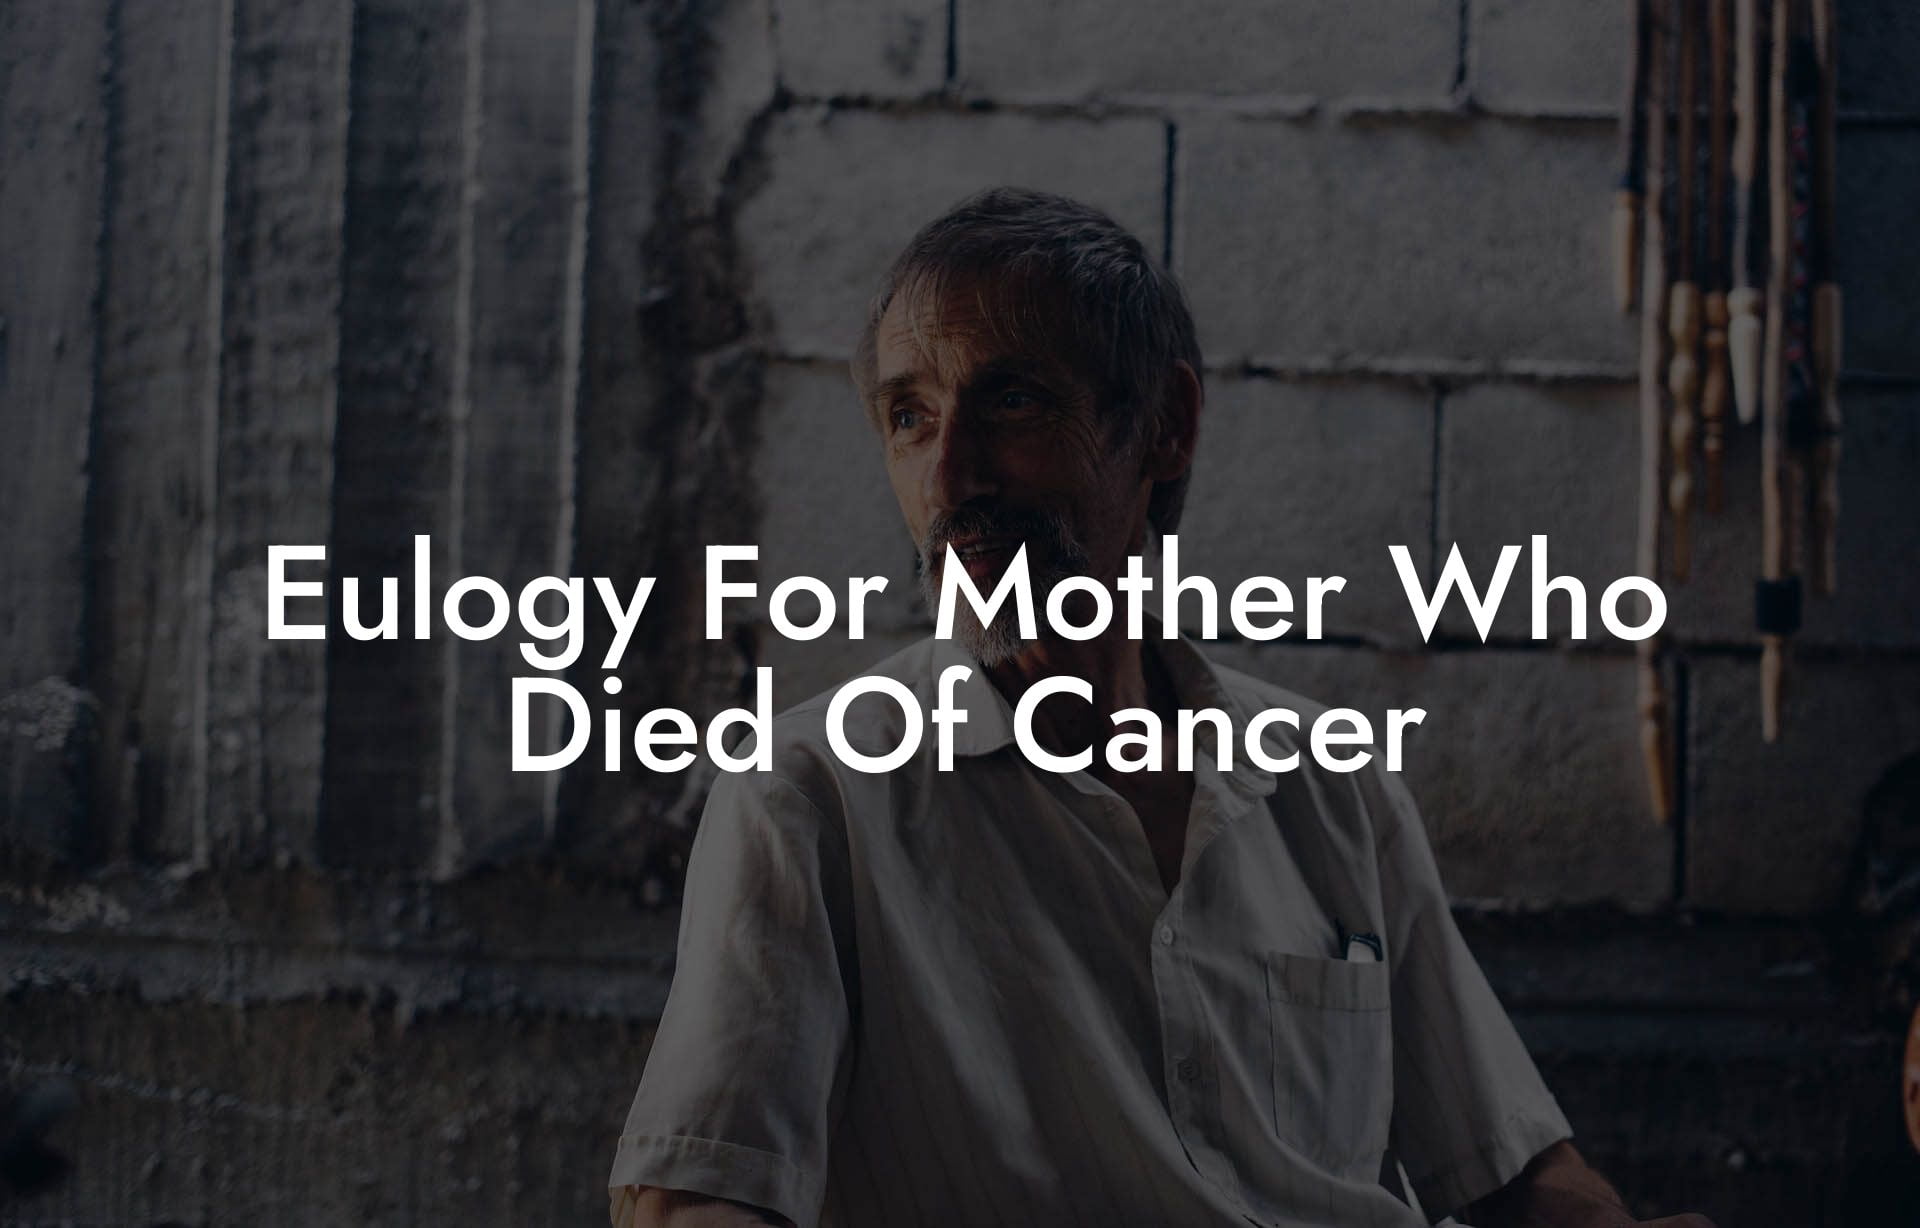 Eulogy For Mother Who Died Of Cancer